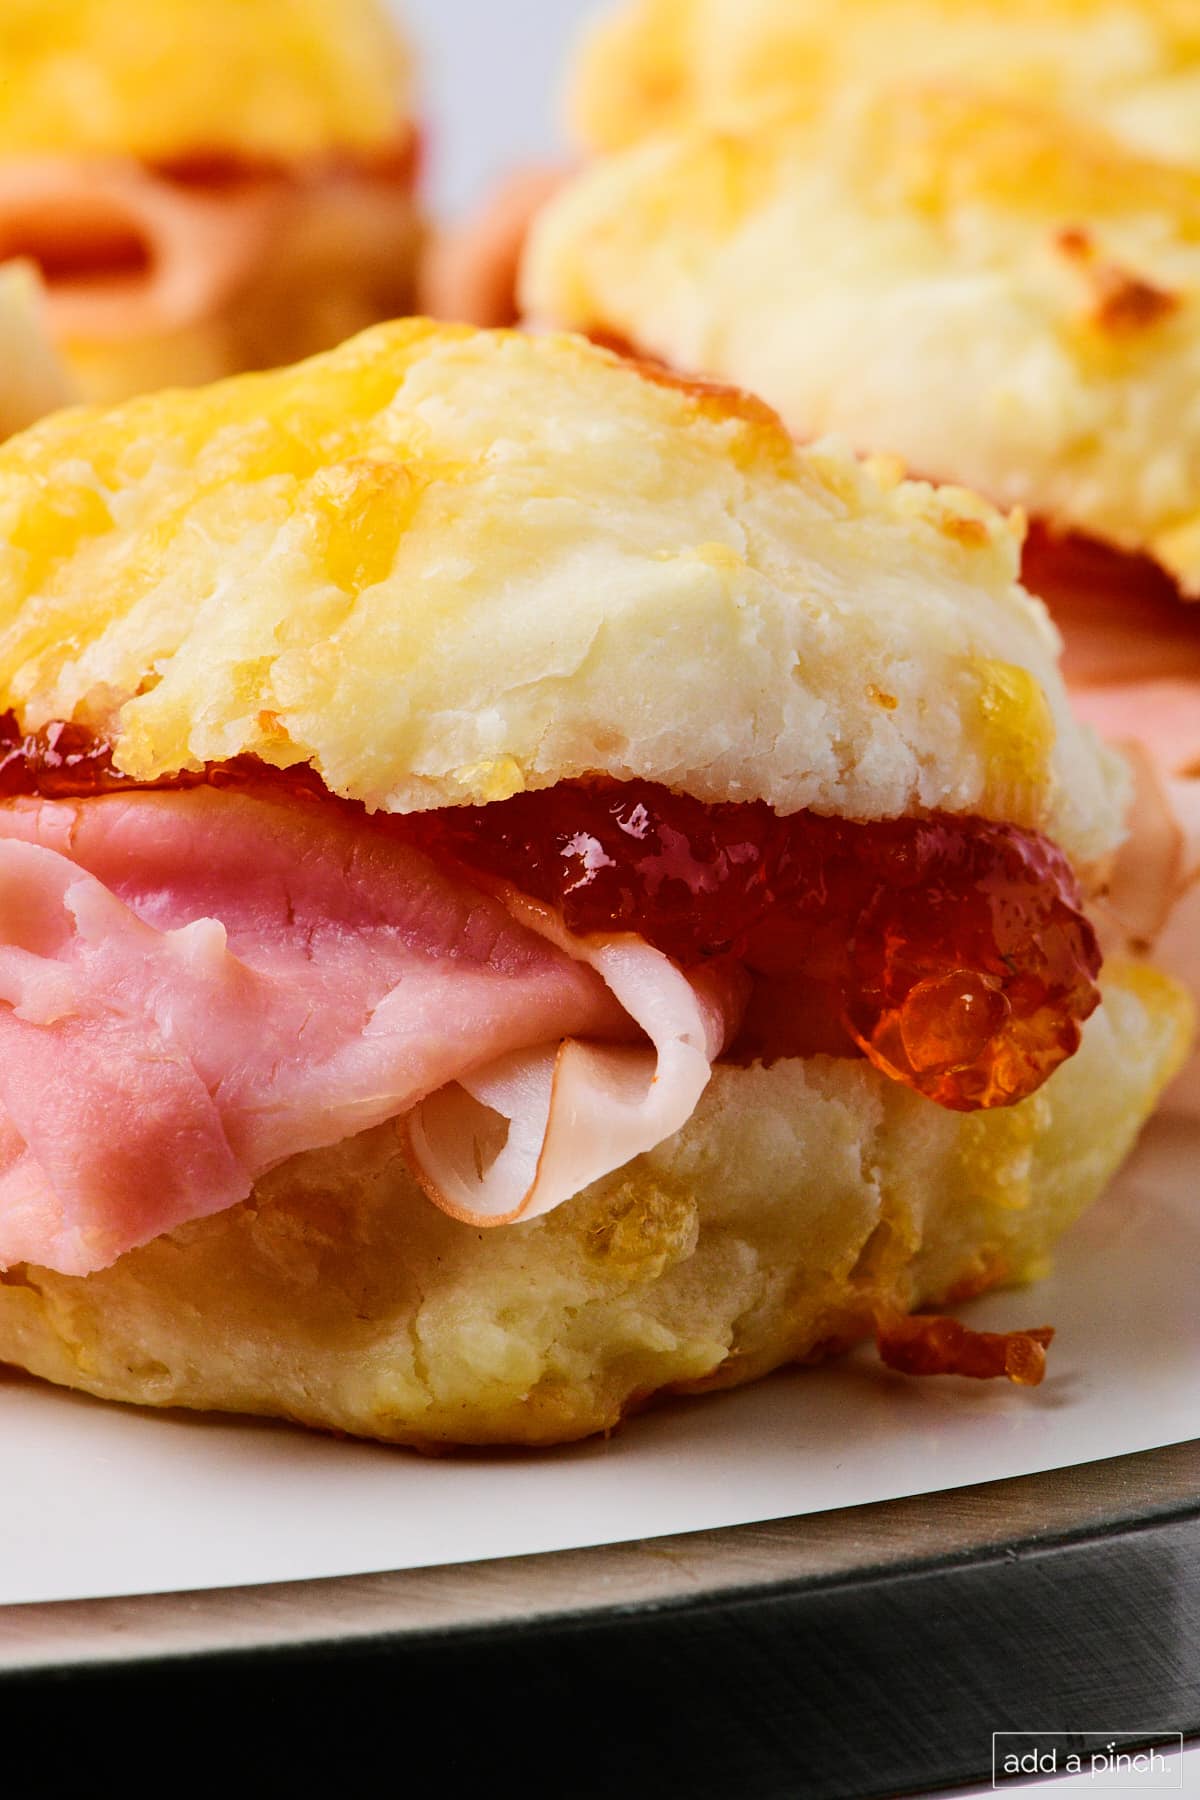 Southern ham biscuits with pepper jelly on a white platter.